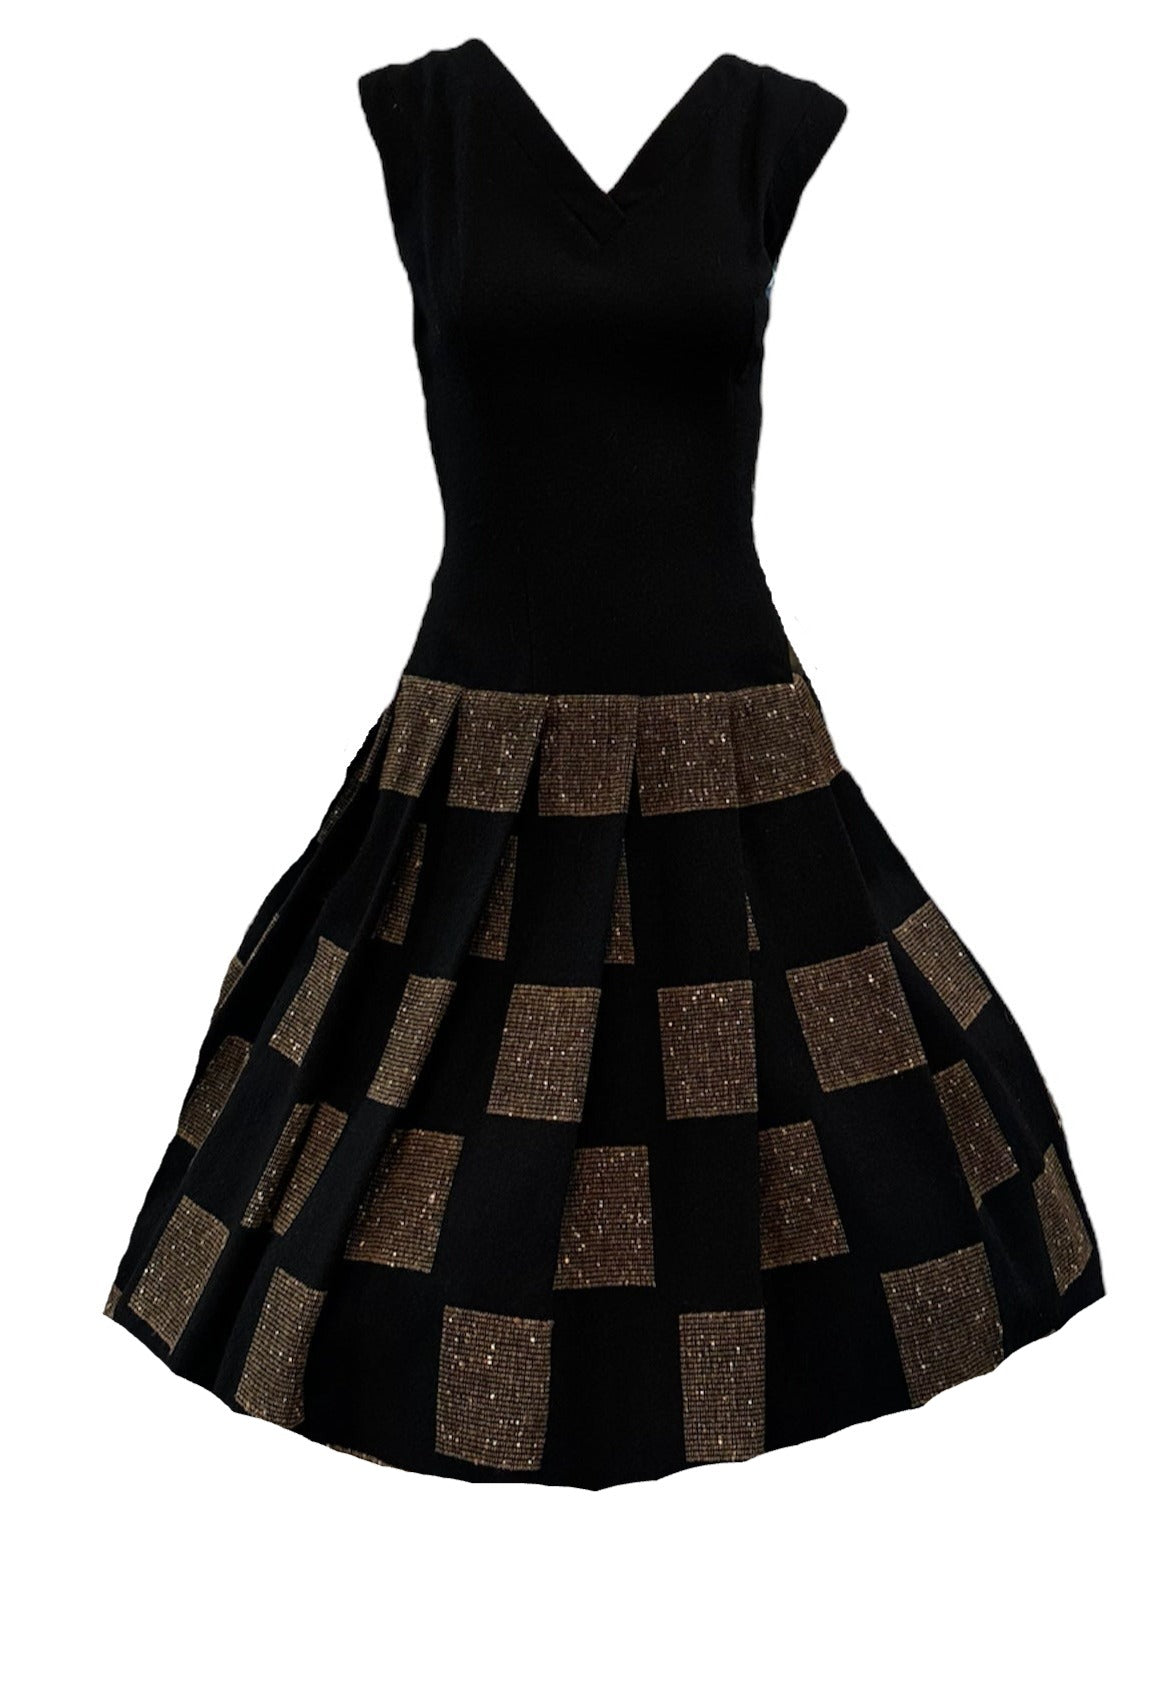  Hal-Mar 50s Madmen Flecked Brown and Black Checkerboard Wool  Dress Ensemble DRESS FRONT 3 of 7